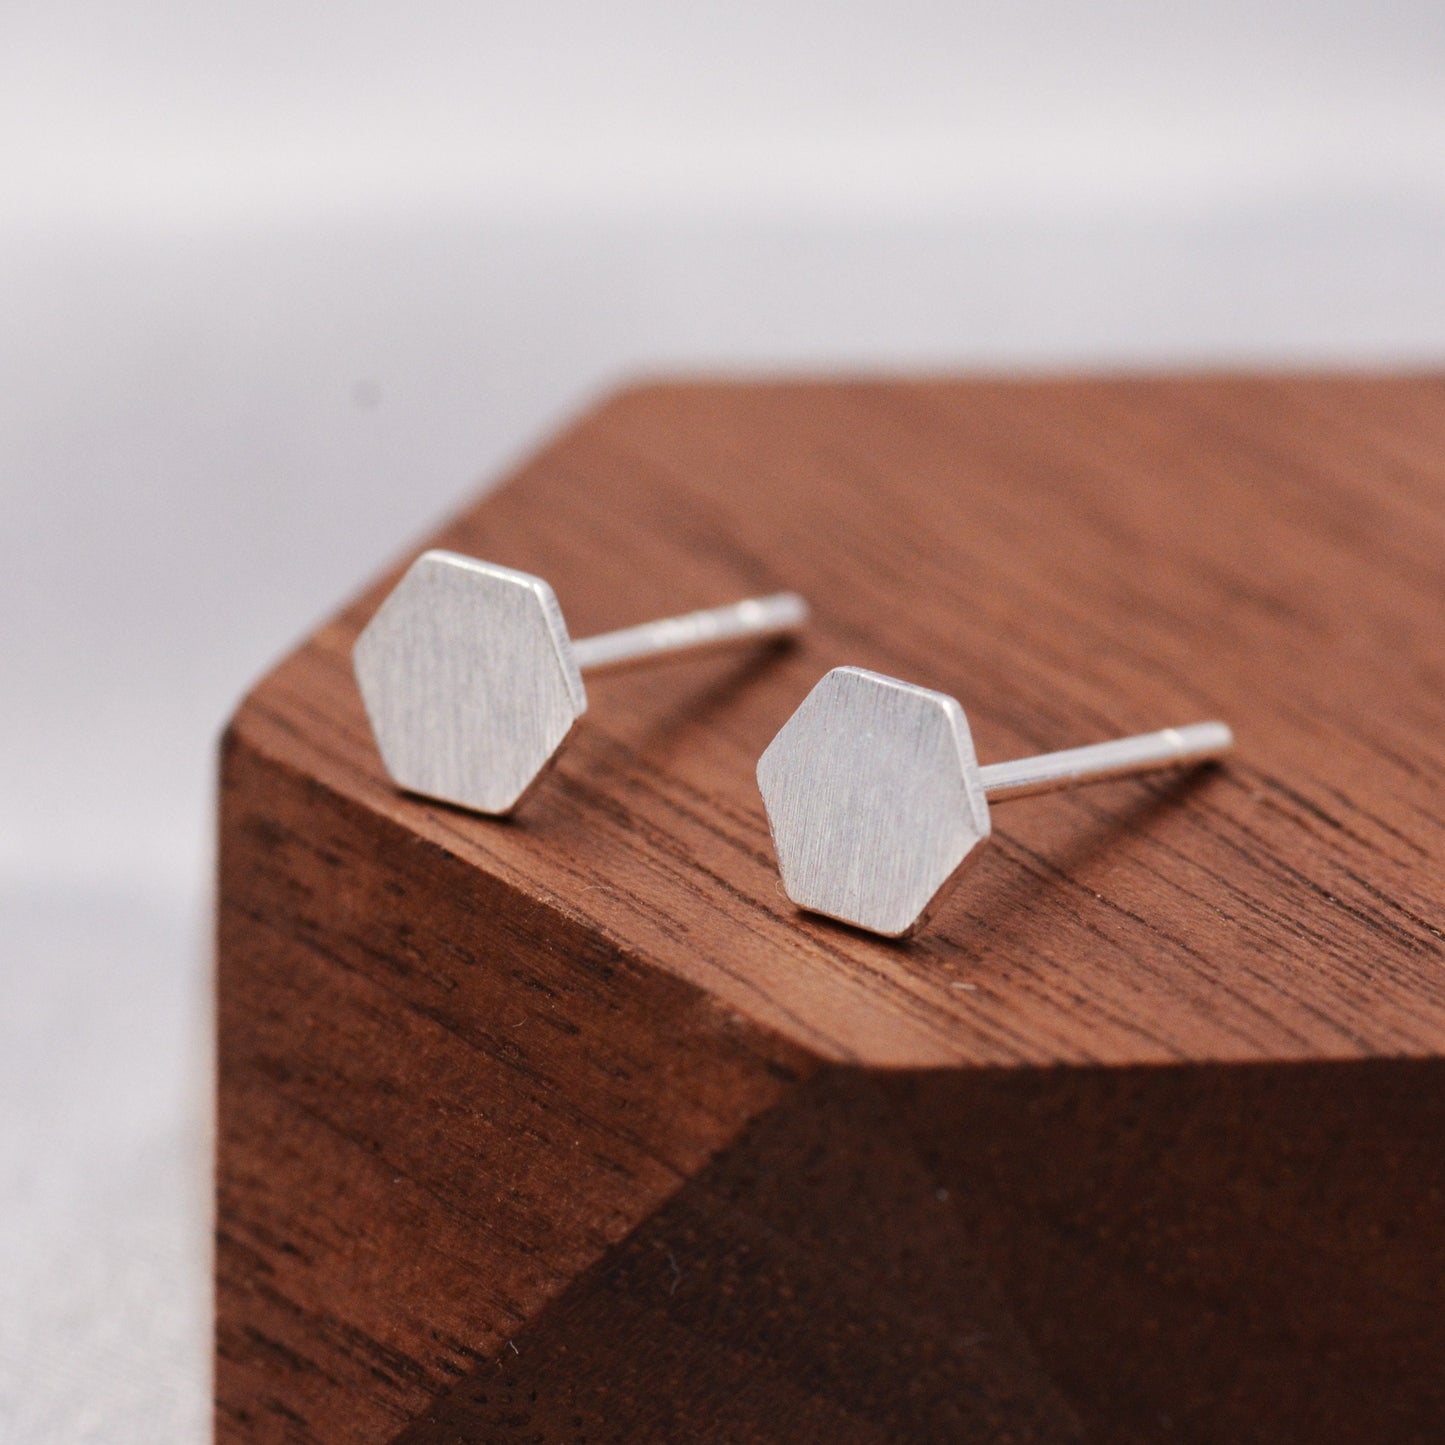 Sterling Silver Minimalist Hexagon Geometric Stud Earrings - Textured Finish  - Dainty and Discreet